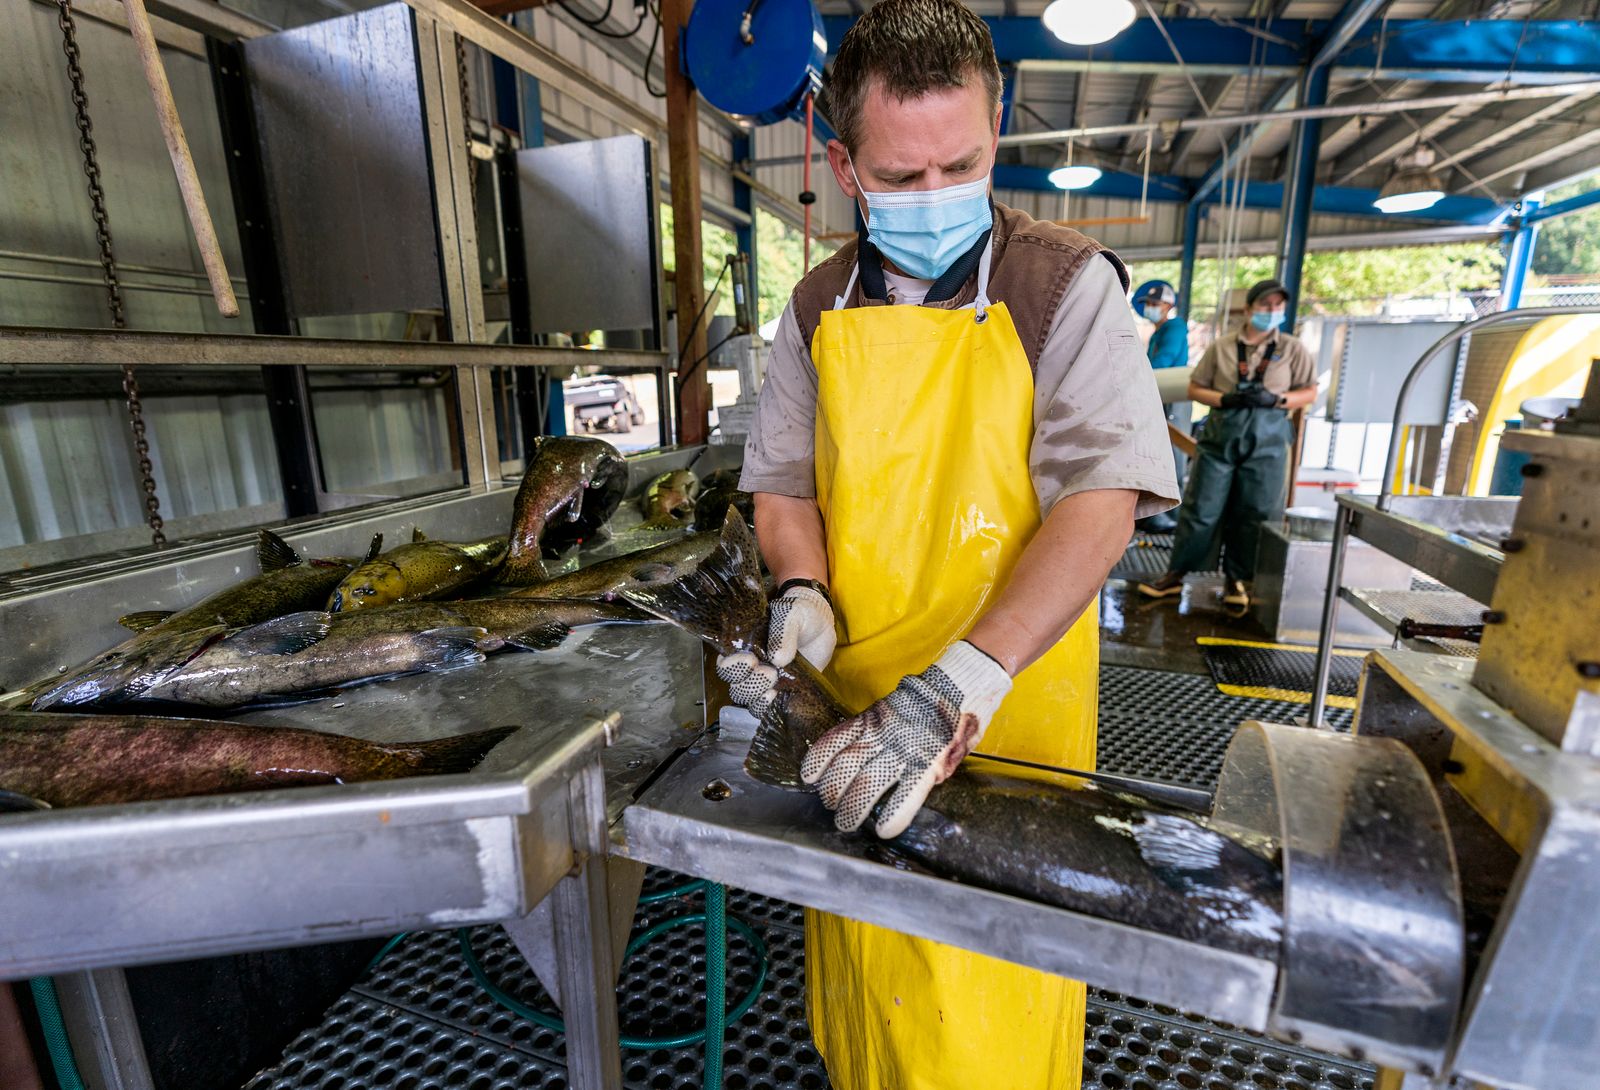 A man in a yellow waterproof apron slides a fish headfirst toward a machine. Beside him is a stainless steel table of other fish.